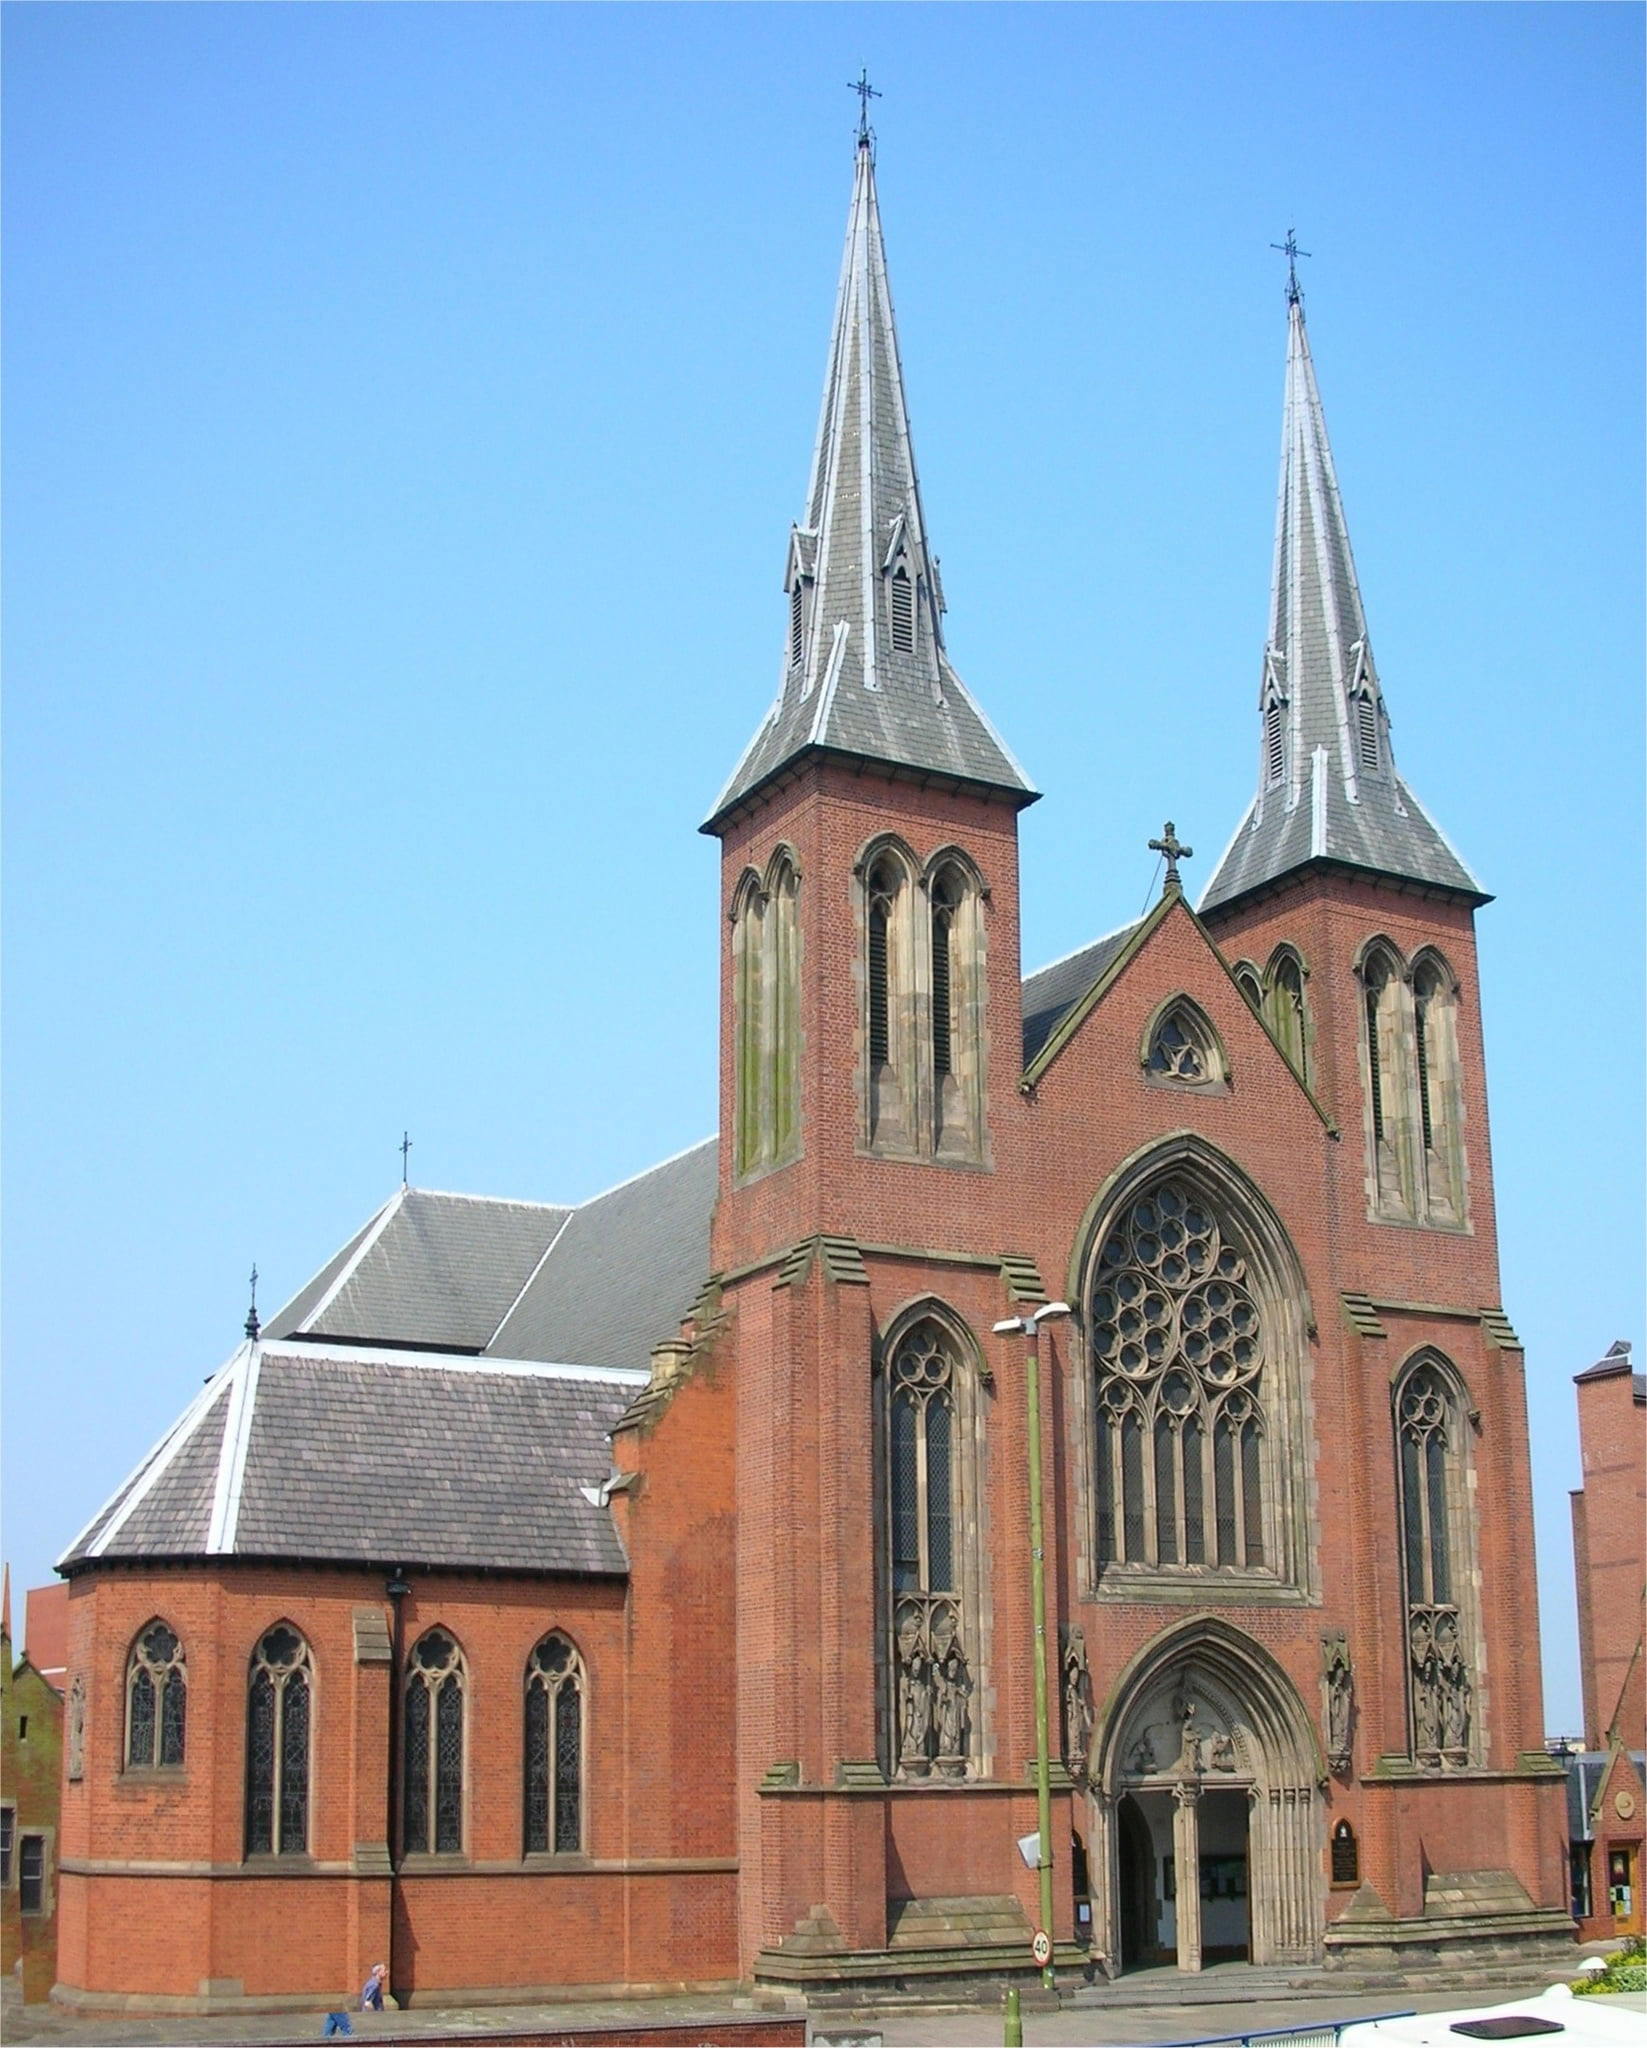 The Metropolitan Cathedral and Basilica of St Chad